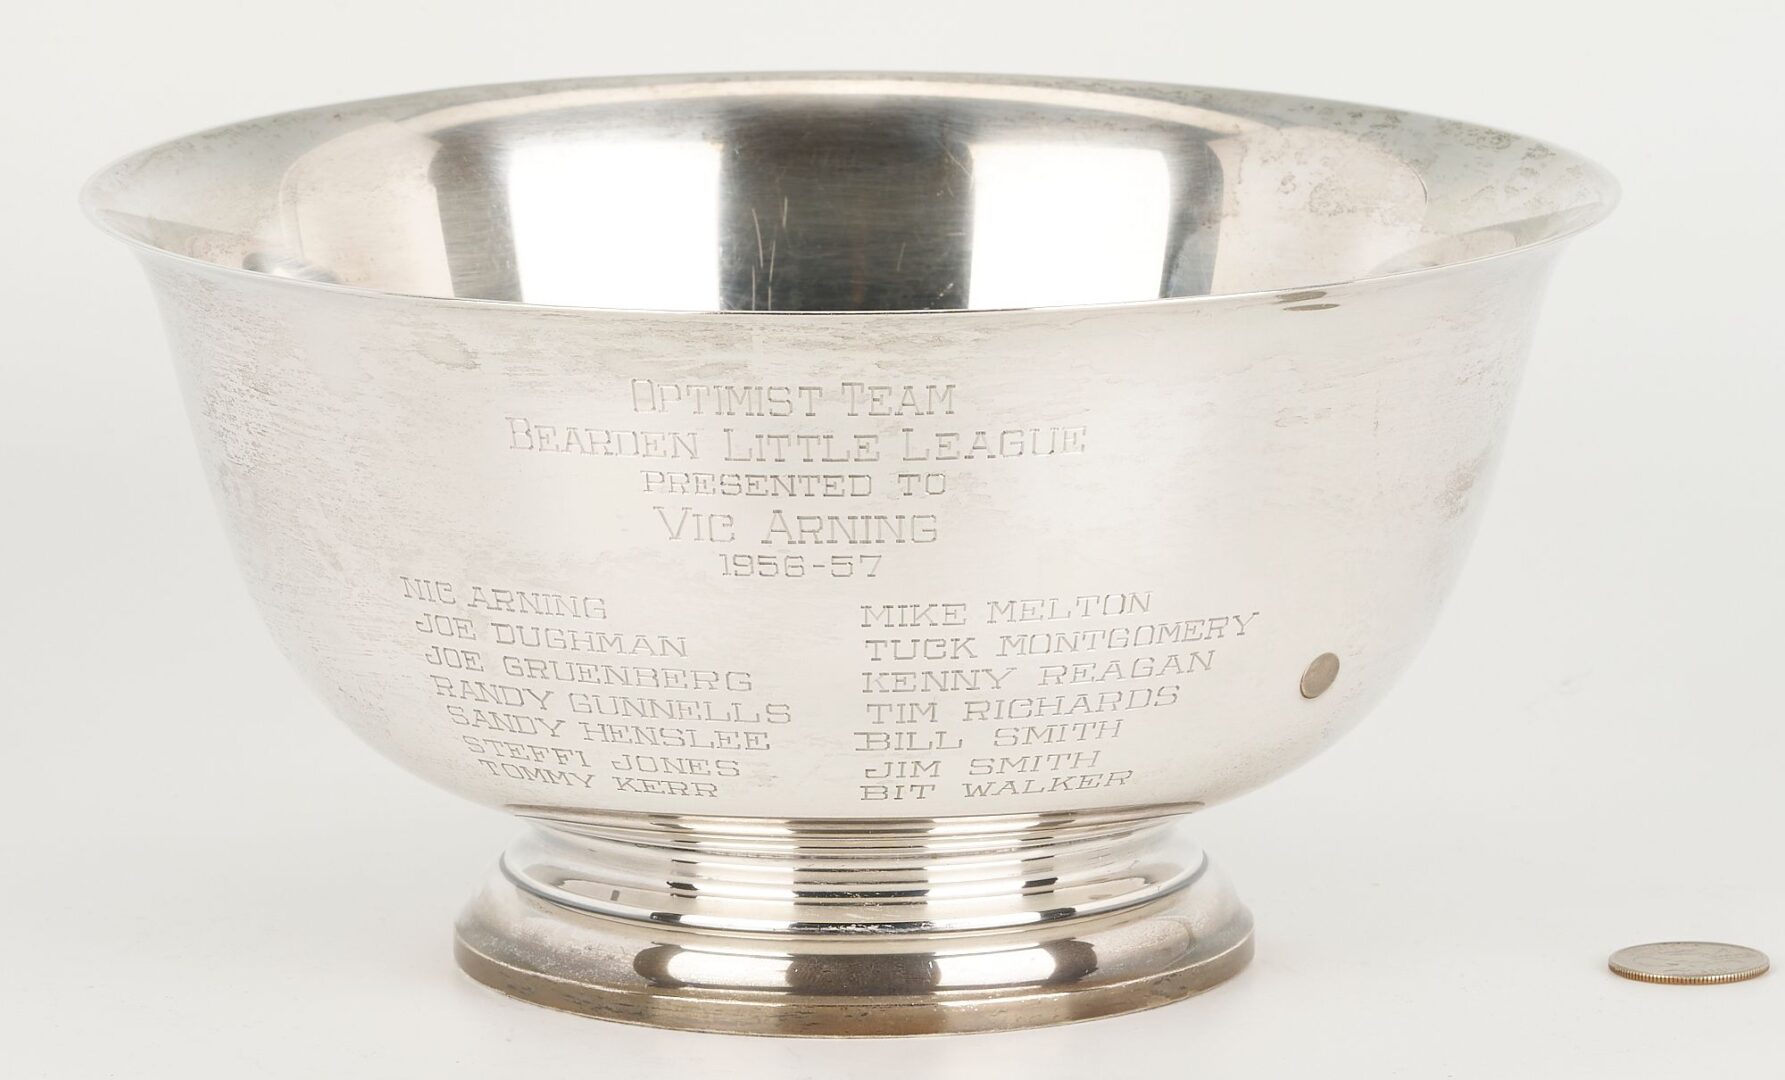 Lot 1071: Paul Revere Reproduction Sterling Silver Bowl by Gorham